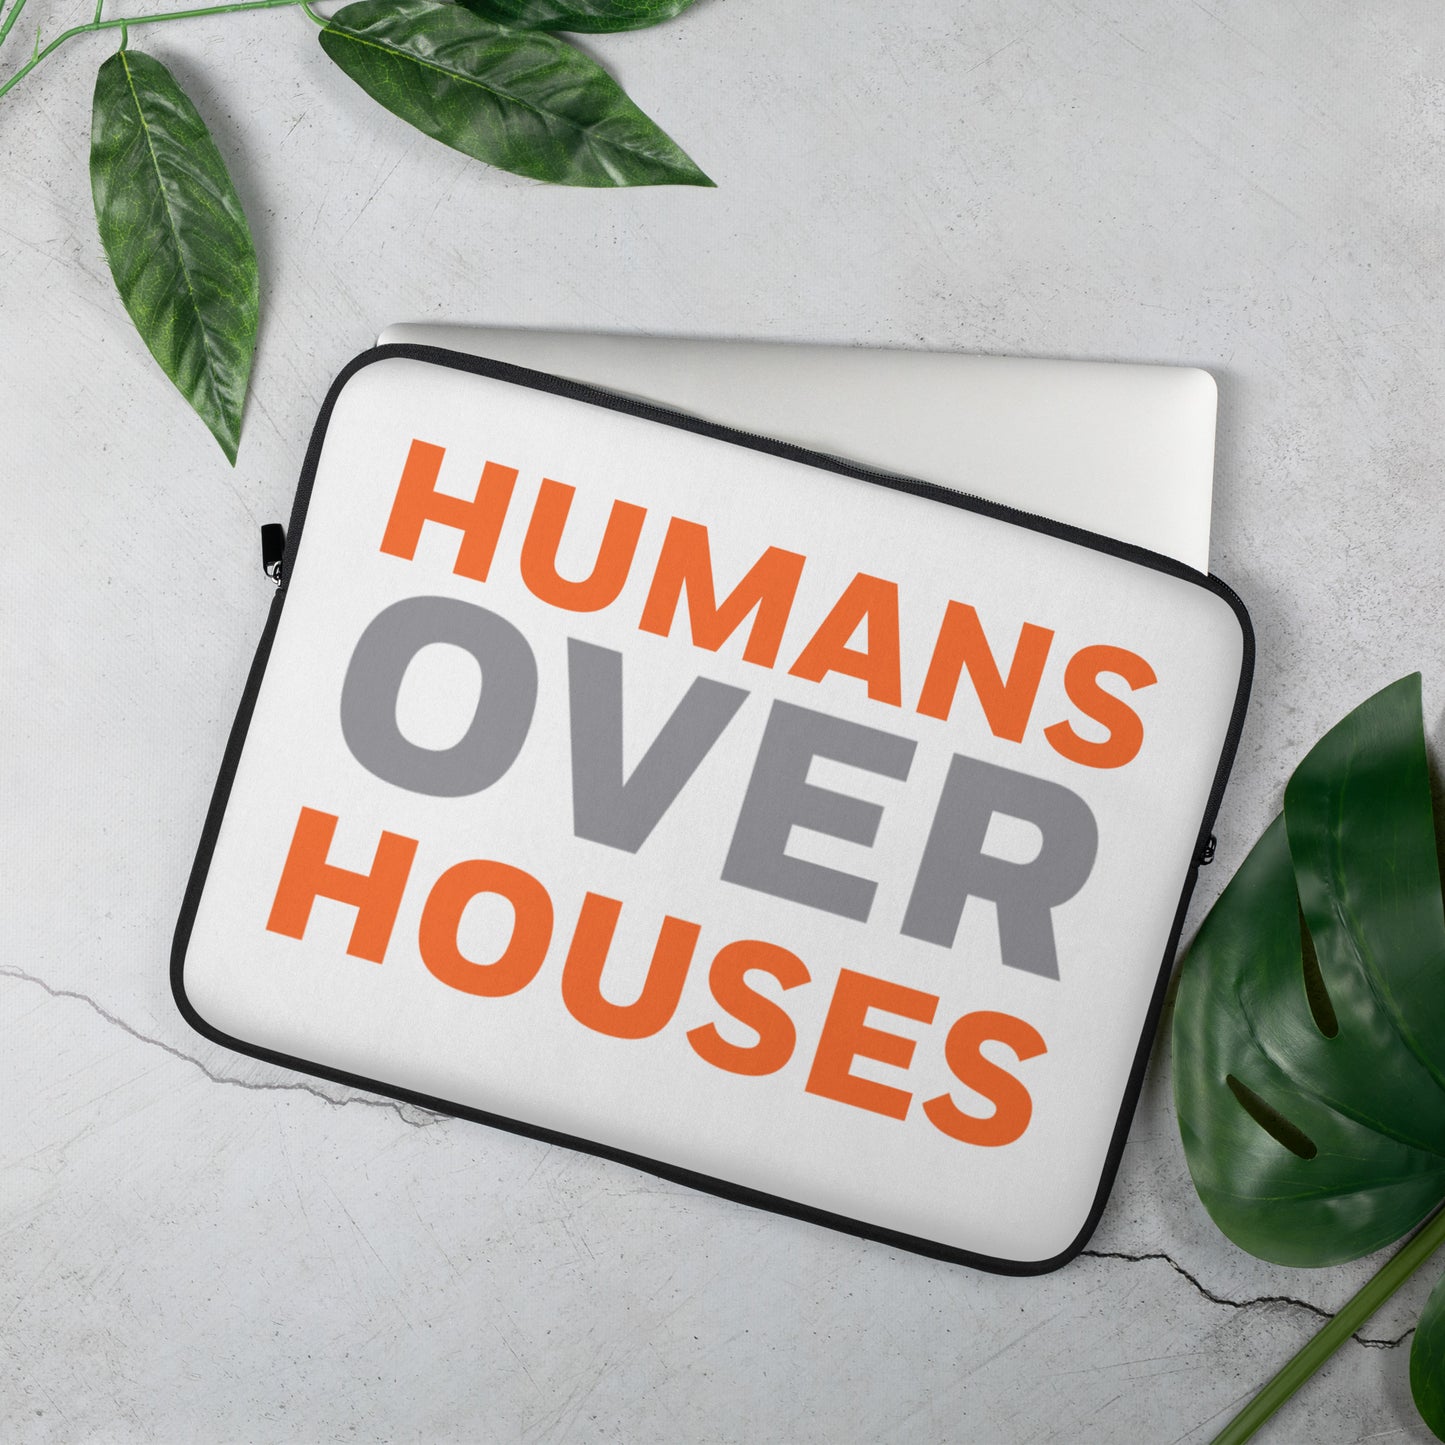 Humans Over Houses Laptop Sleeve